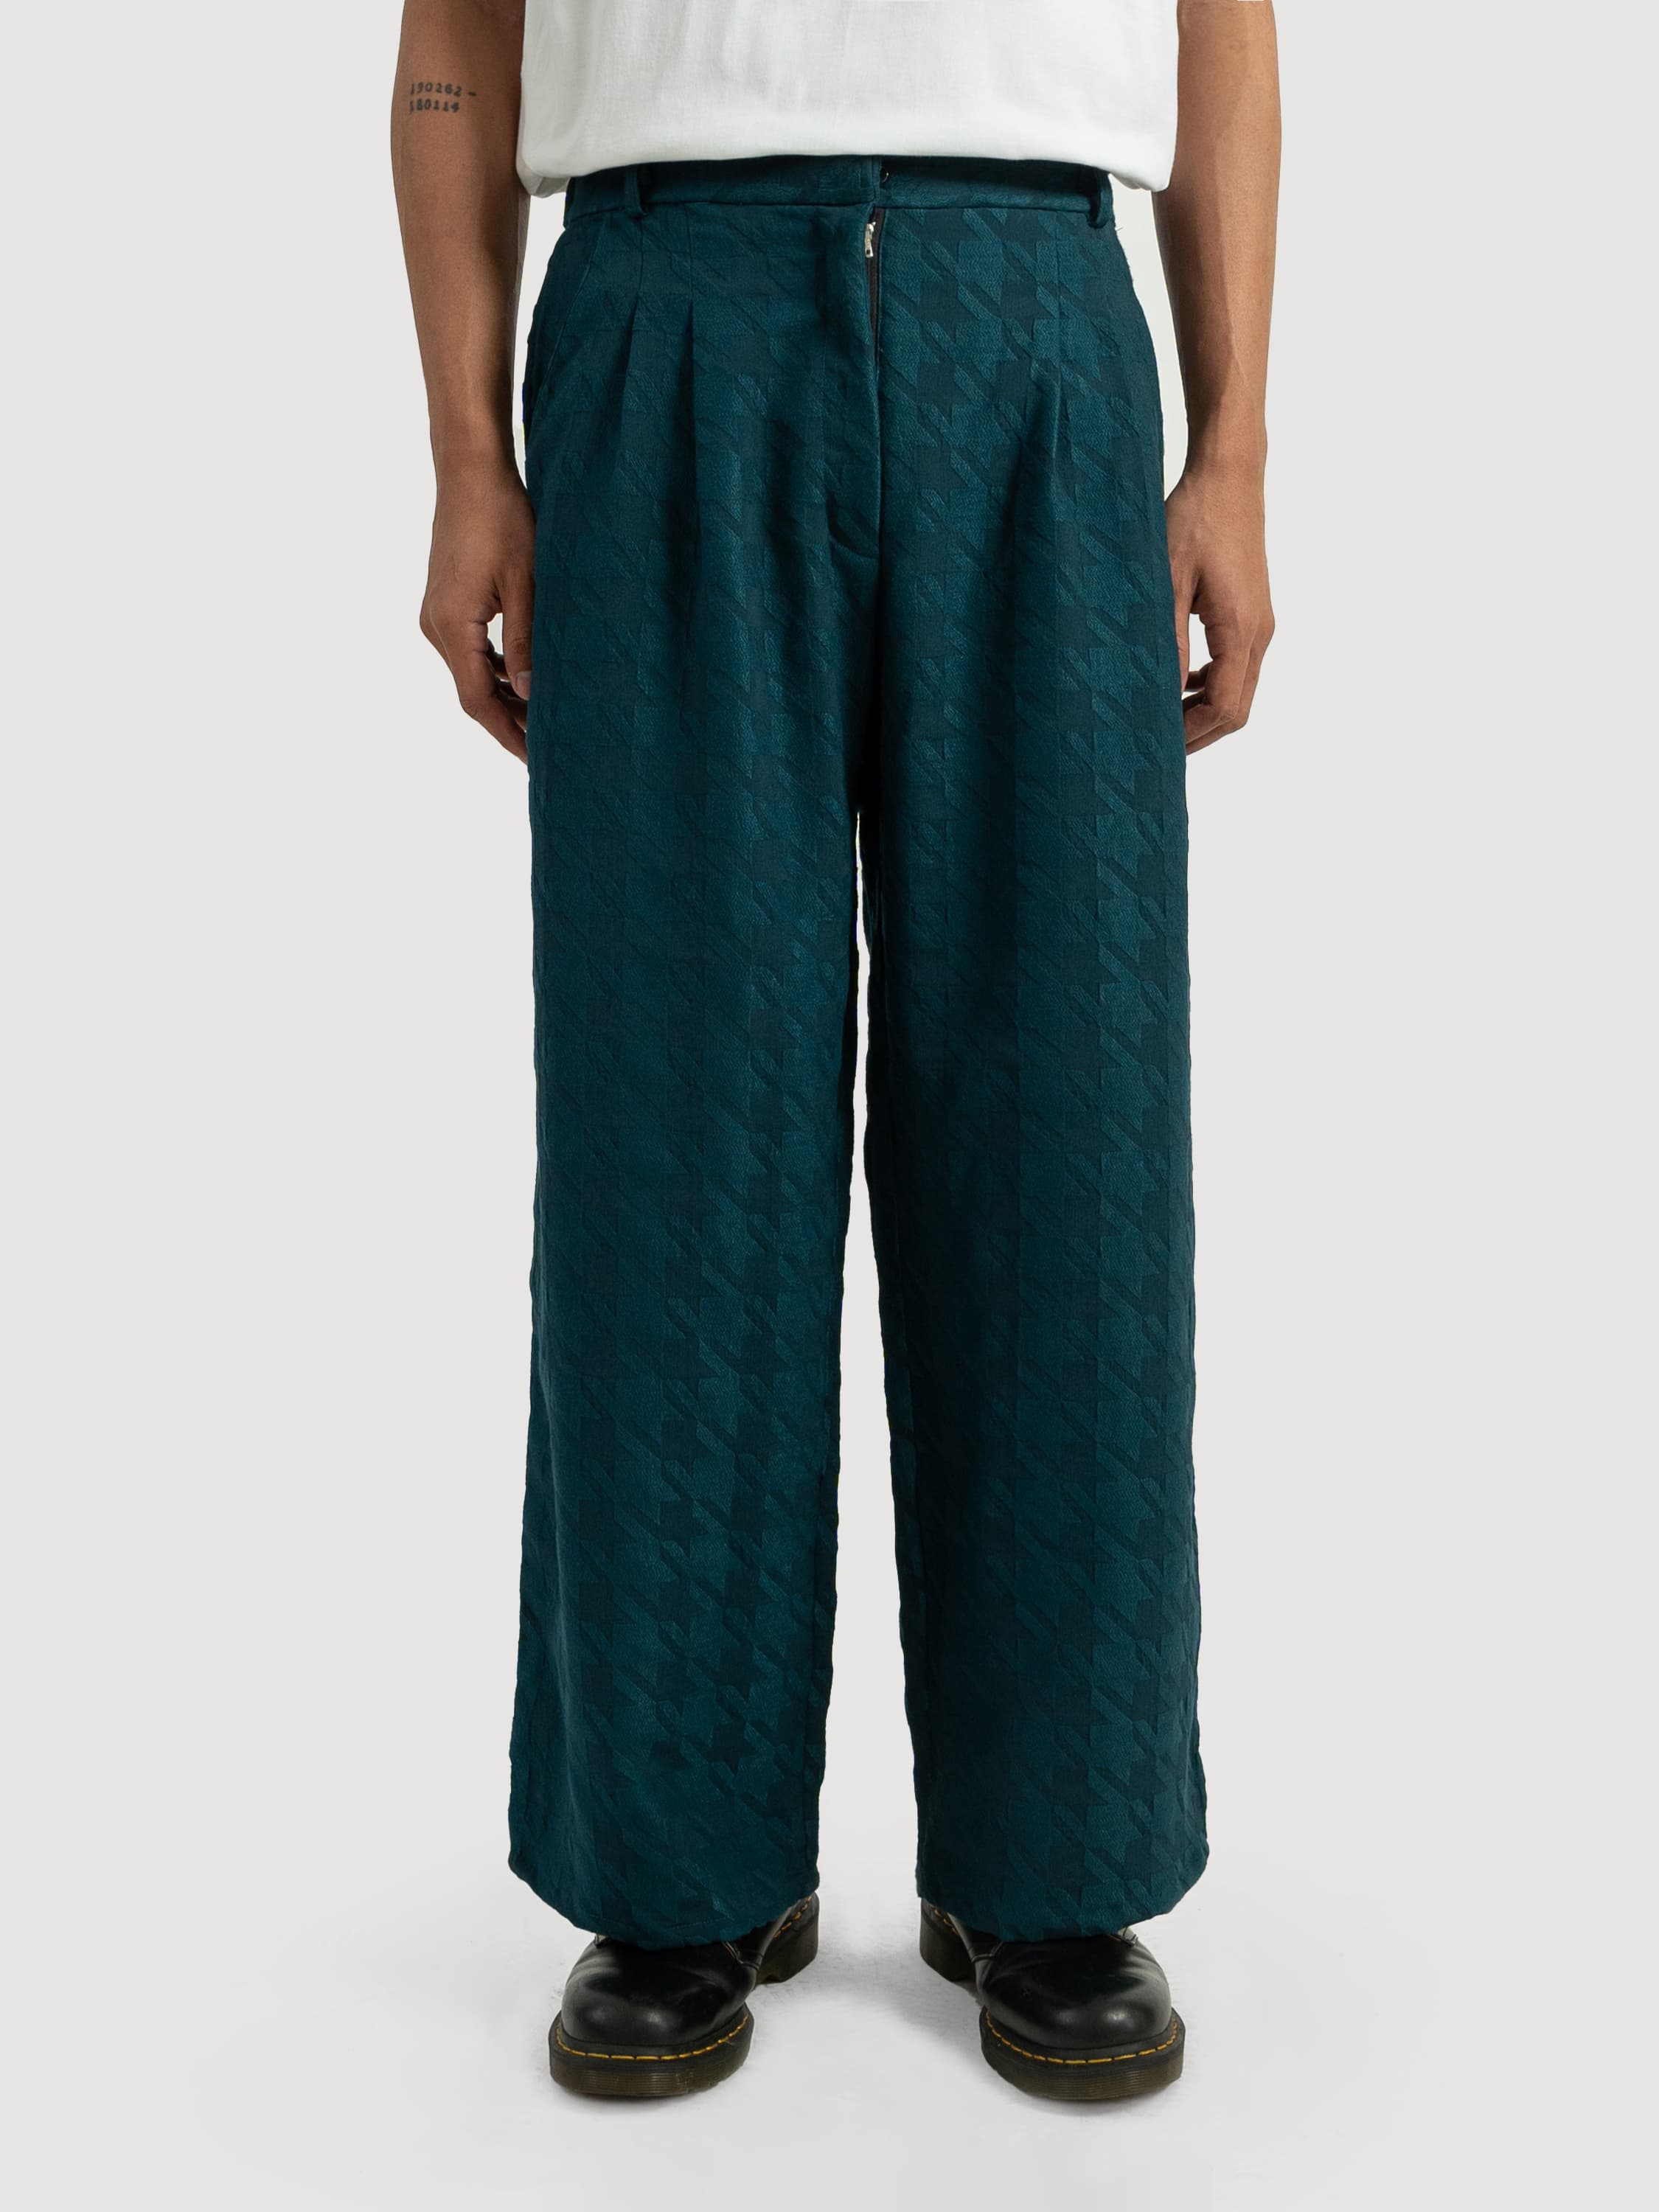 Emerald Hound Trousers